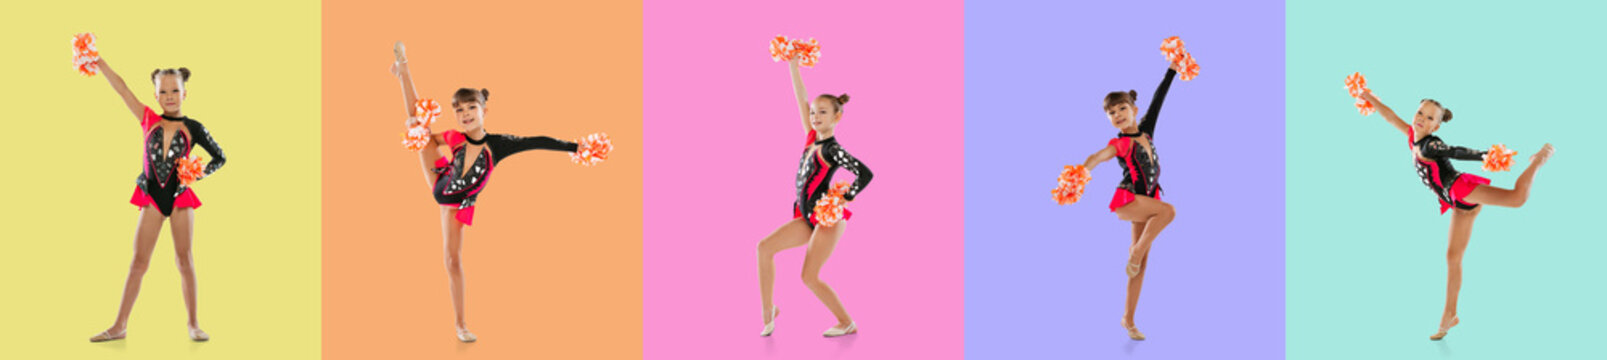 Collage of images of little girls, cheerleaders training isolated over multicolored background